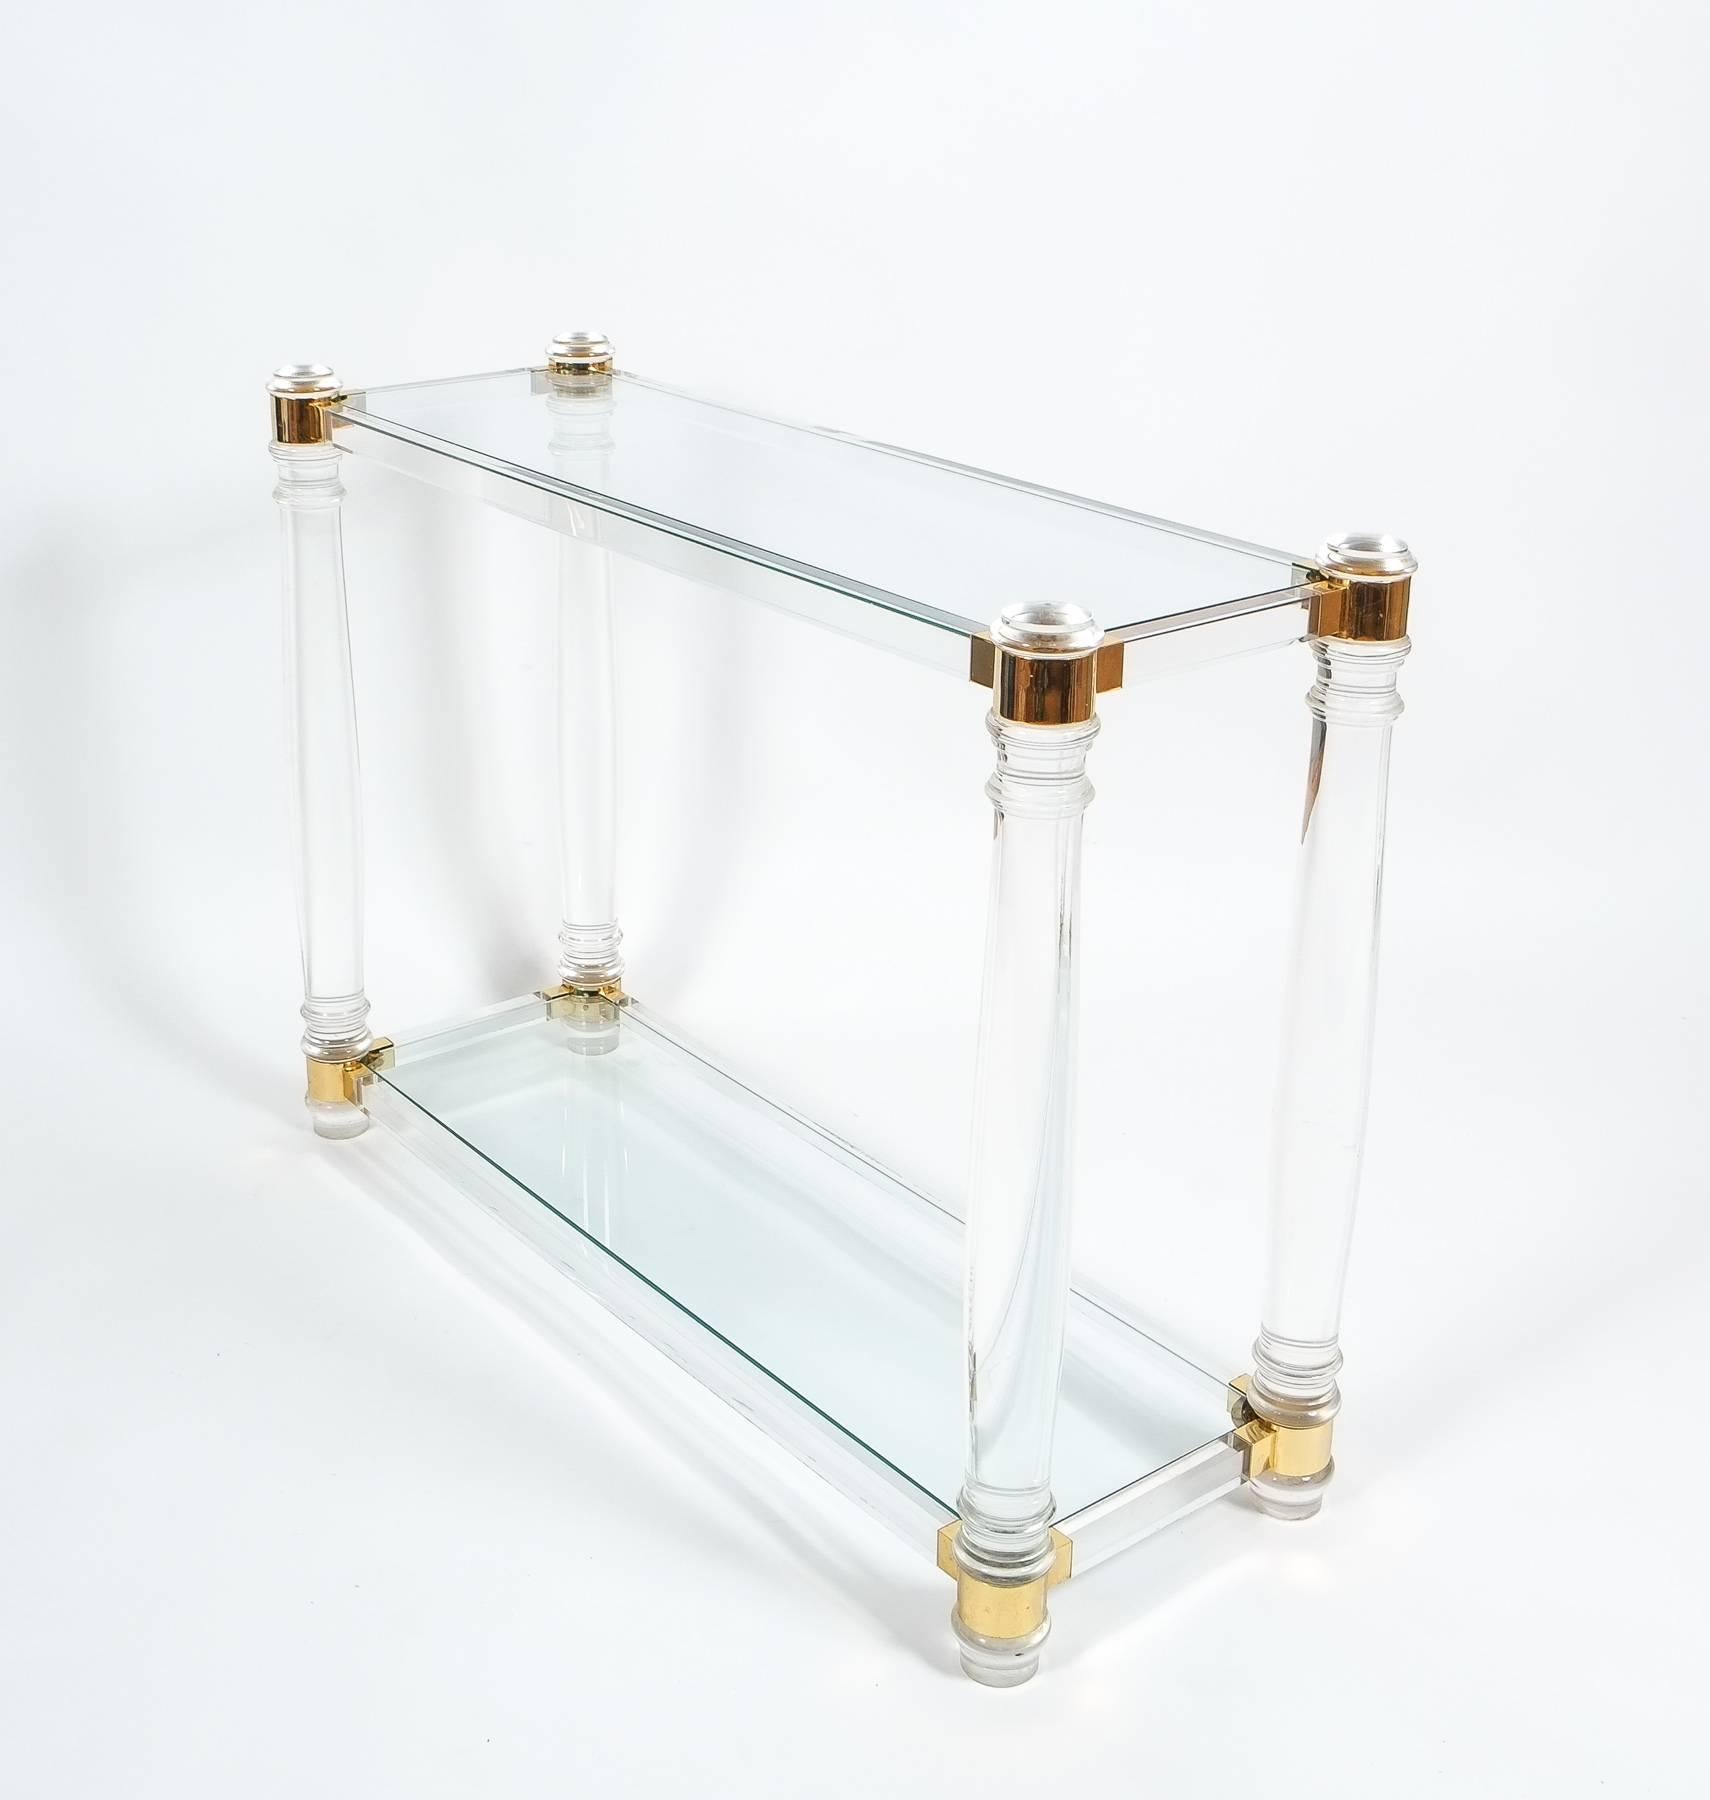 Classical console table by Romeo Rega consisting of round Lucite pillars and gilt brass joints. Two clear glass trays. The table is in excellent condition, minimal traces of use and some small chips on the glass.